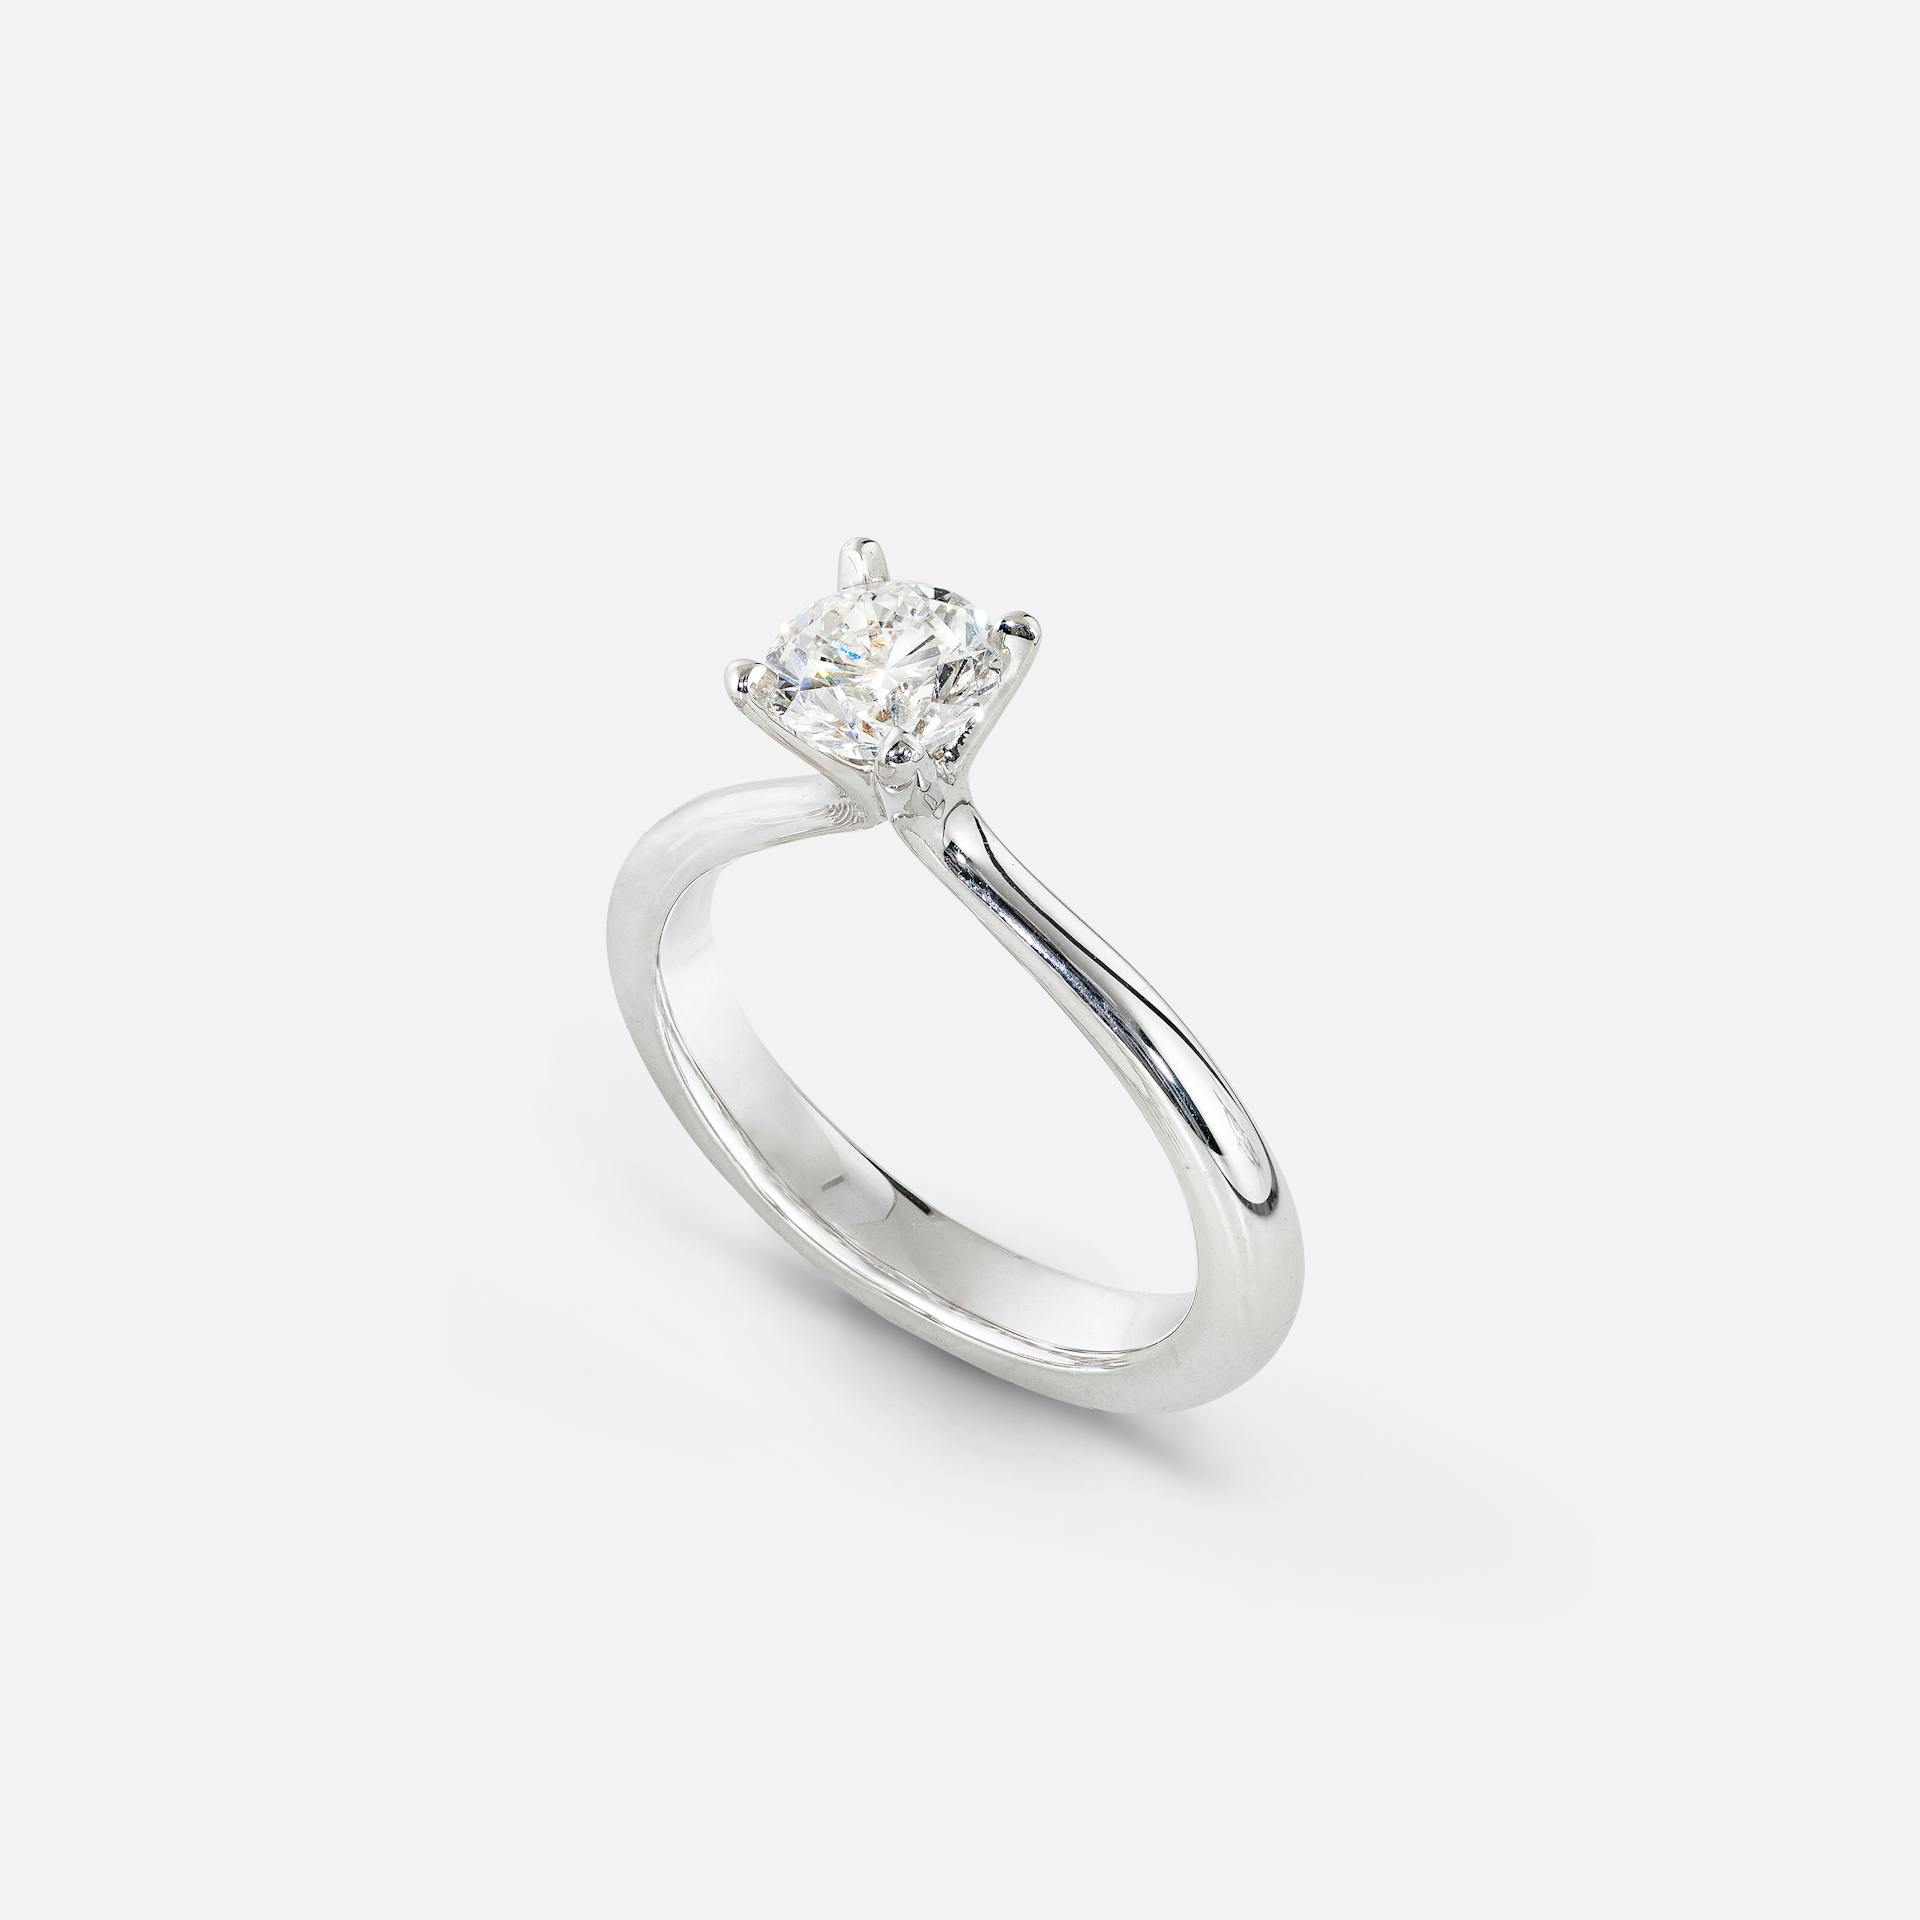 Classic Solitaire Ring Slim in White Gold with Brilliant Cut Diamond  |  Ole Lynggaard Copenhagen 